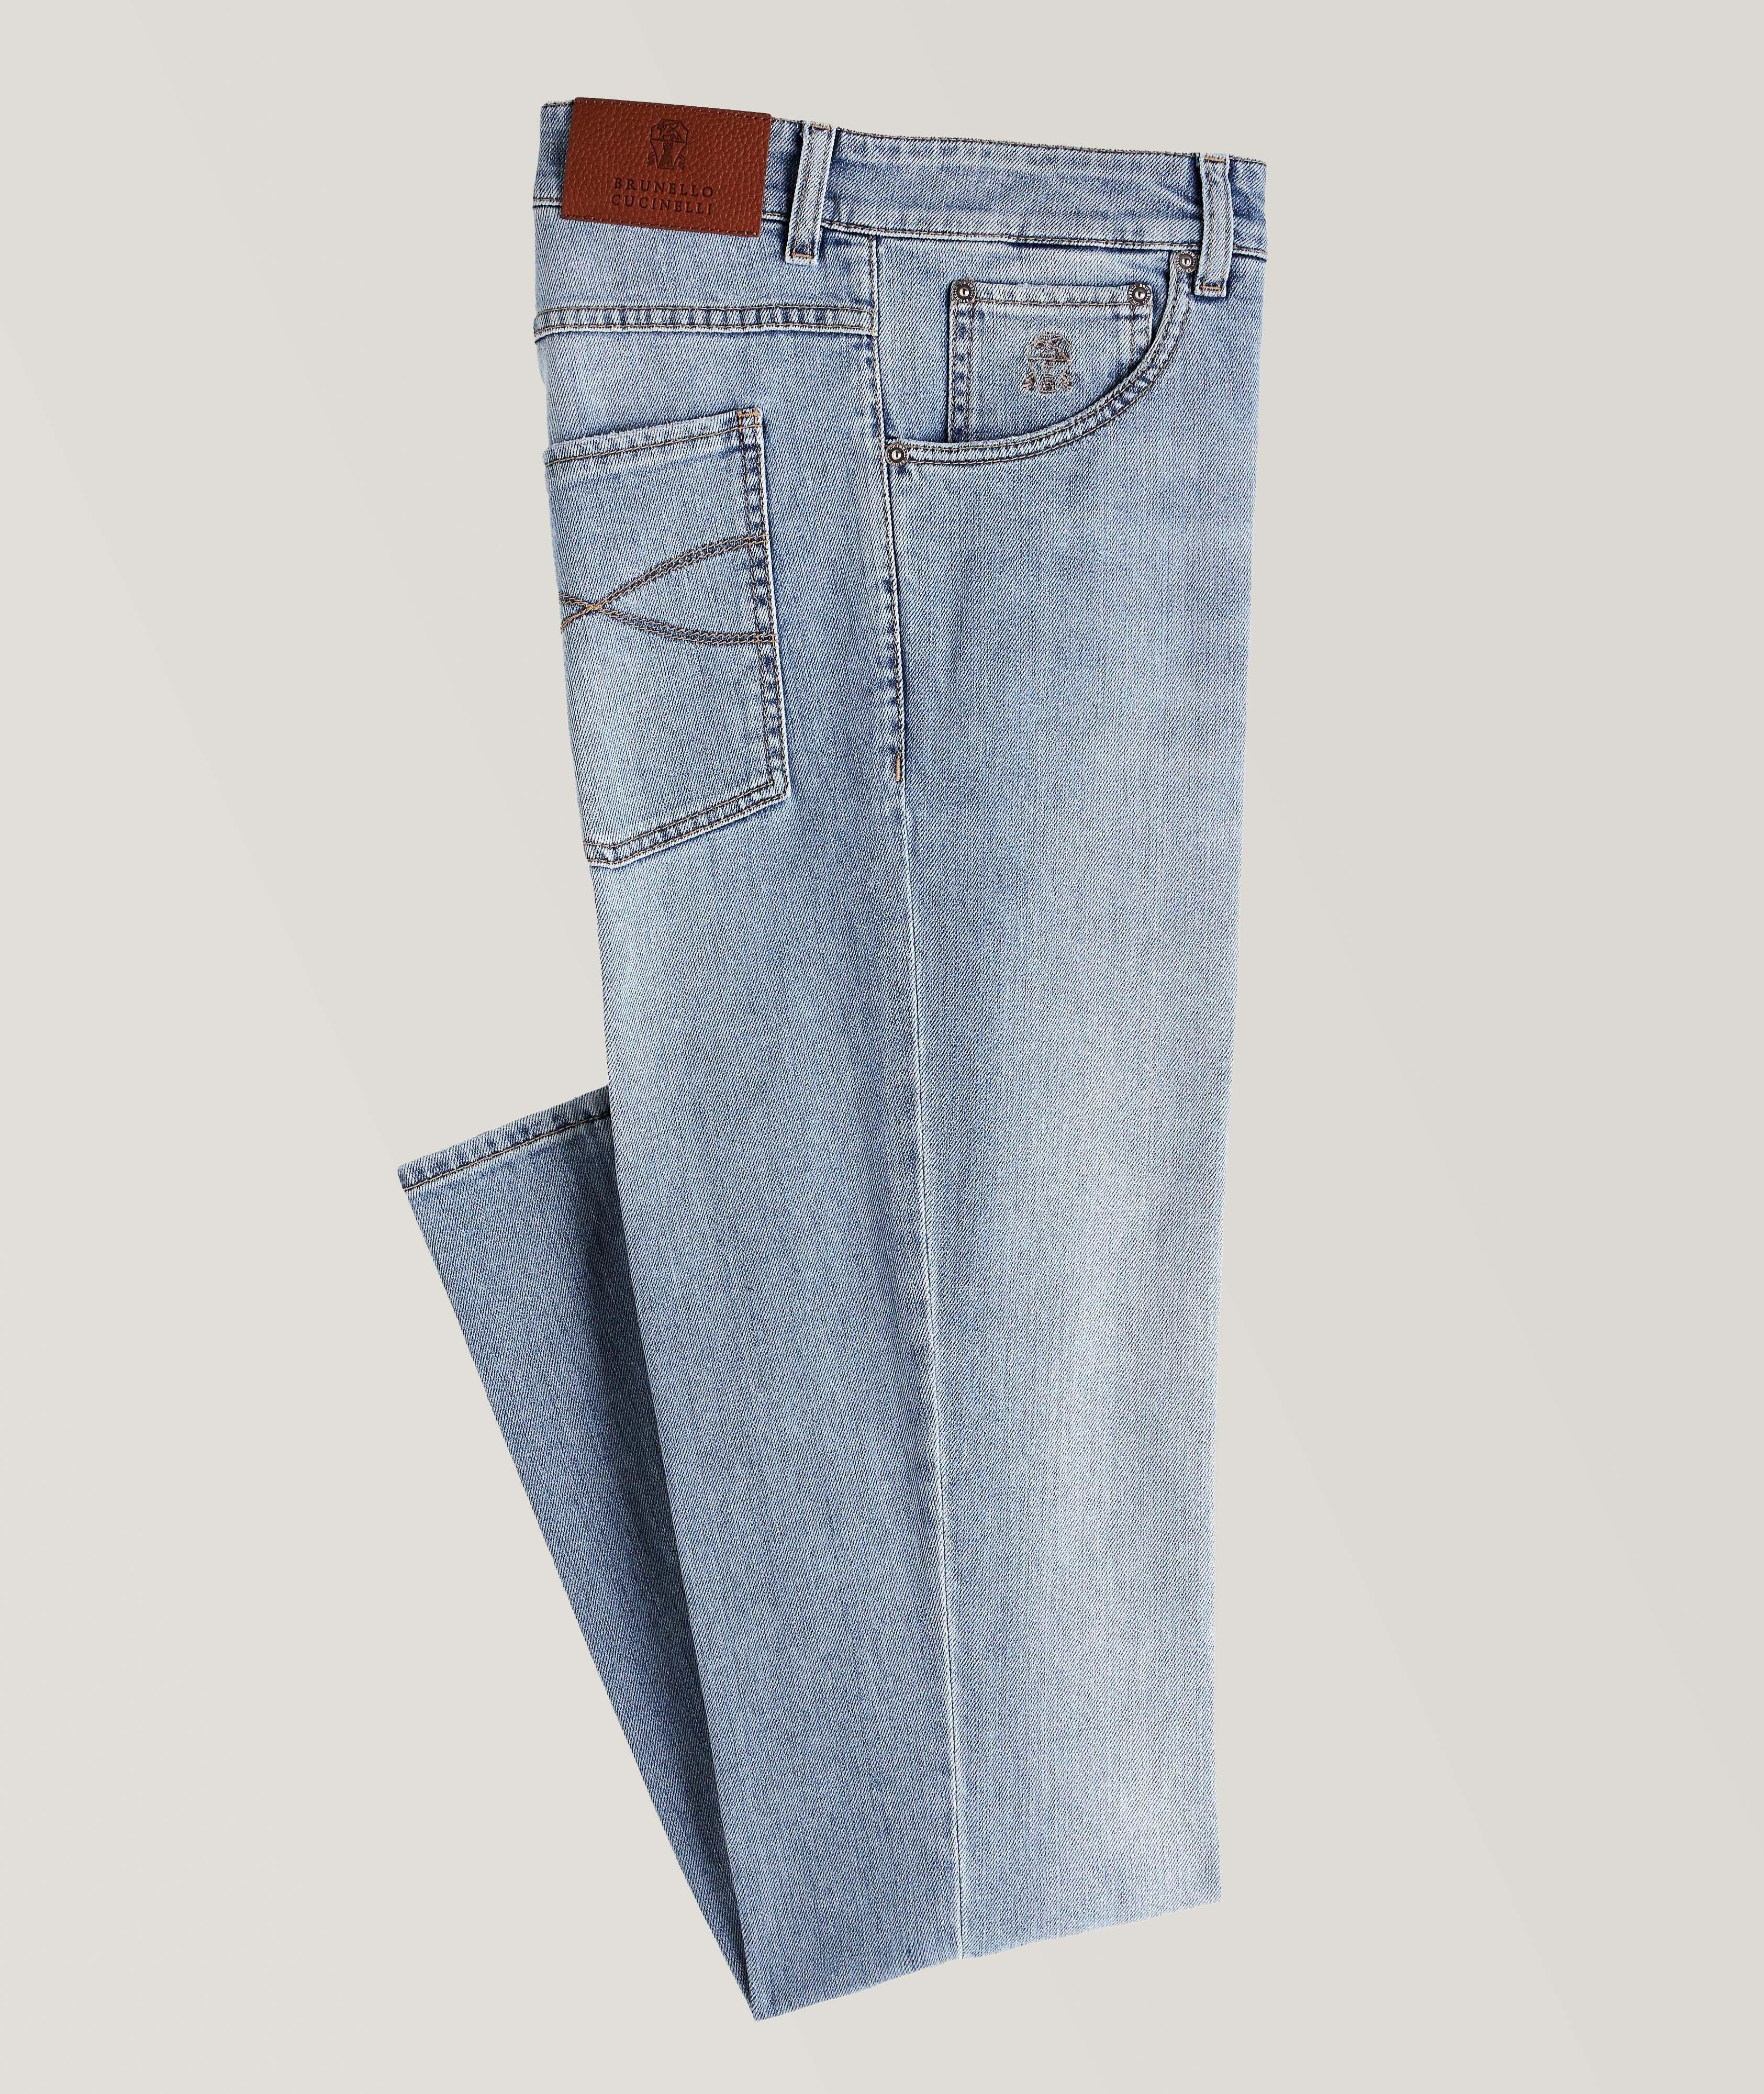 Skinny-Fit Stretch-Cotton Jeans image 0